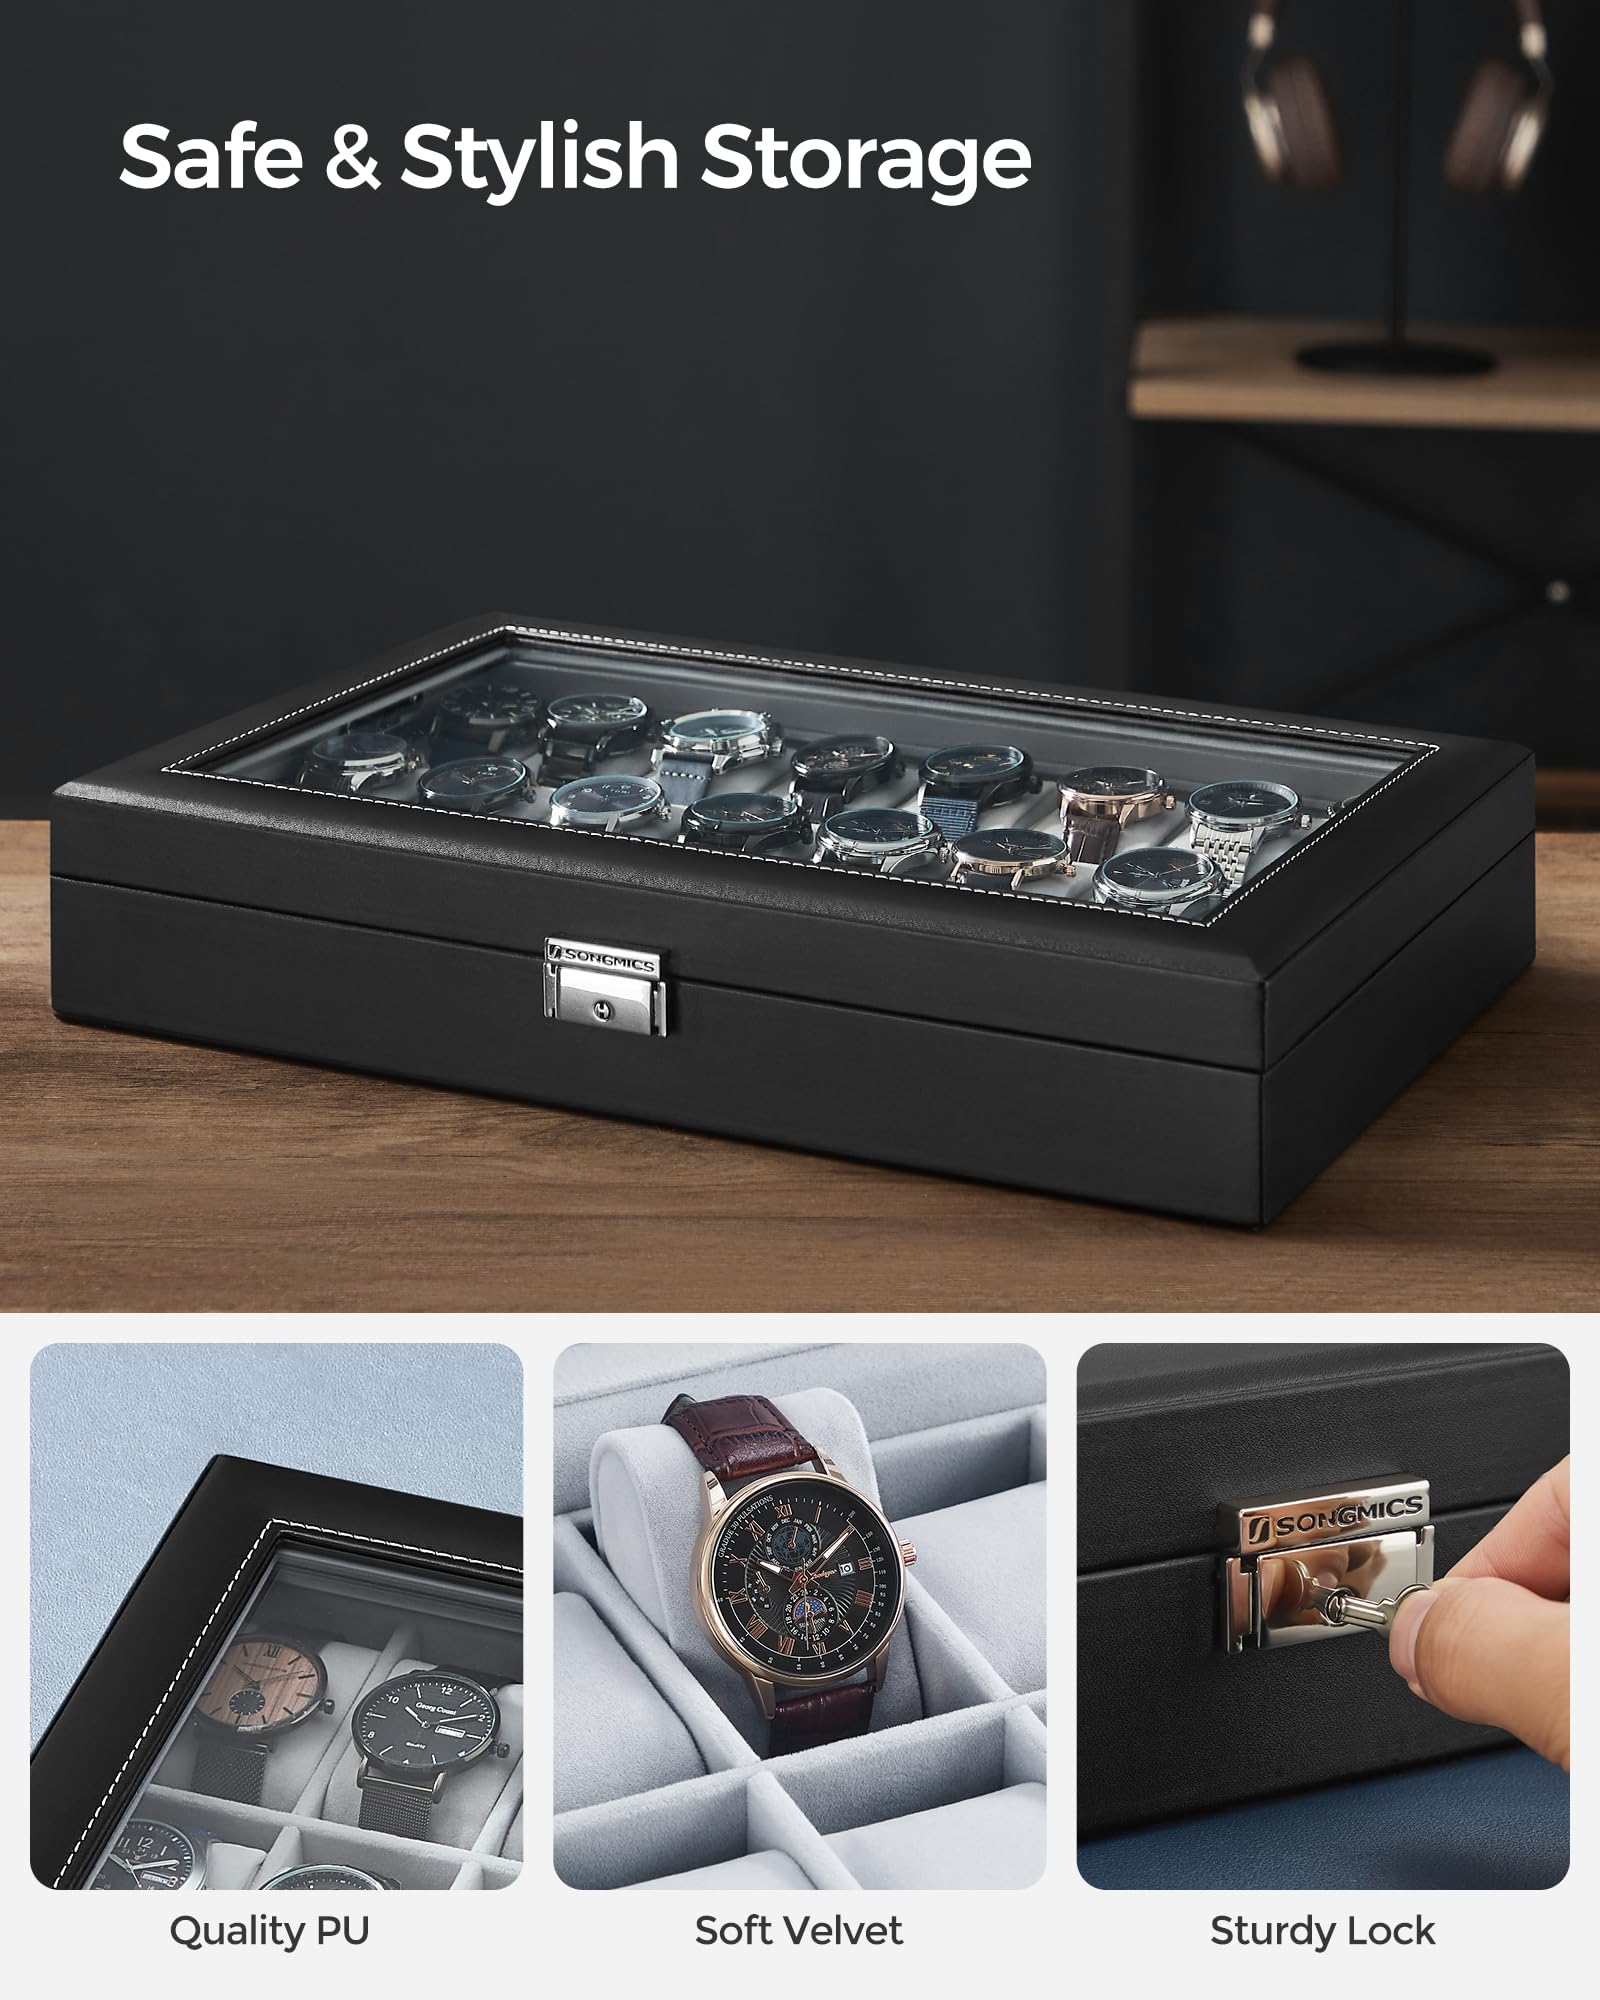 SONGMICS Watch Box, 24-Slot Watch Case, Lockable Watch Storage Box with Glass Lid, Gift Idea, Black Synthetic Leather, Gray Lining UJWB024